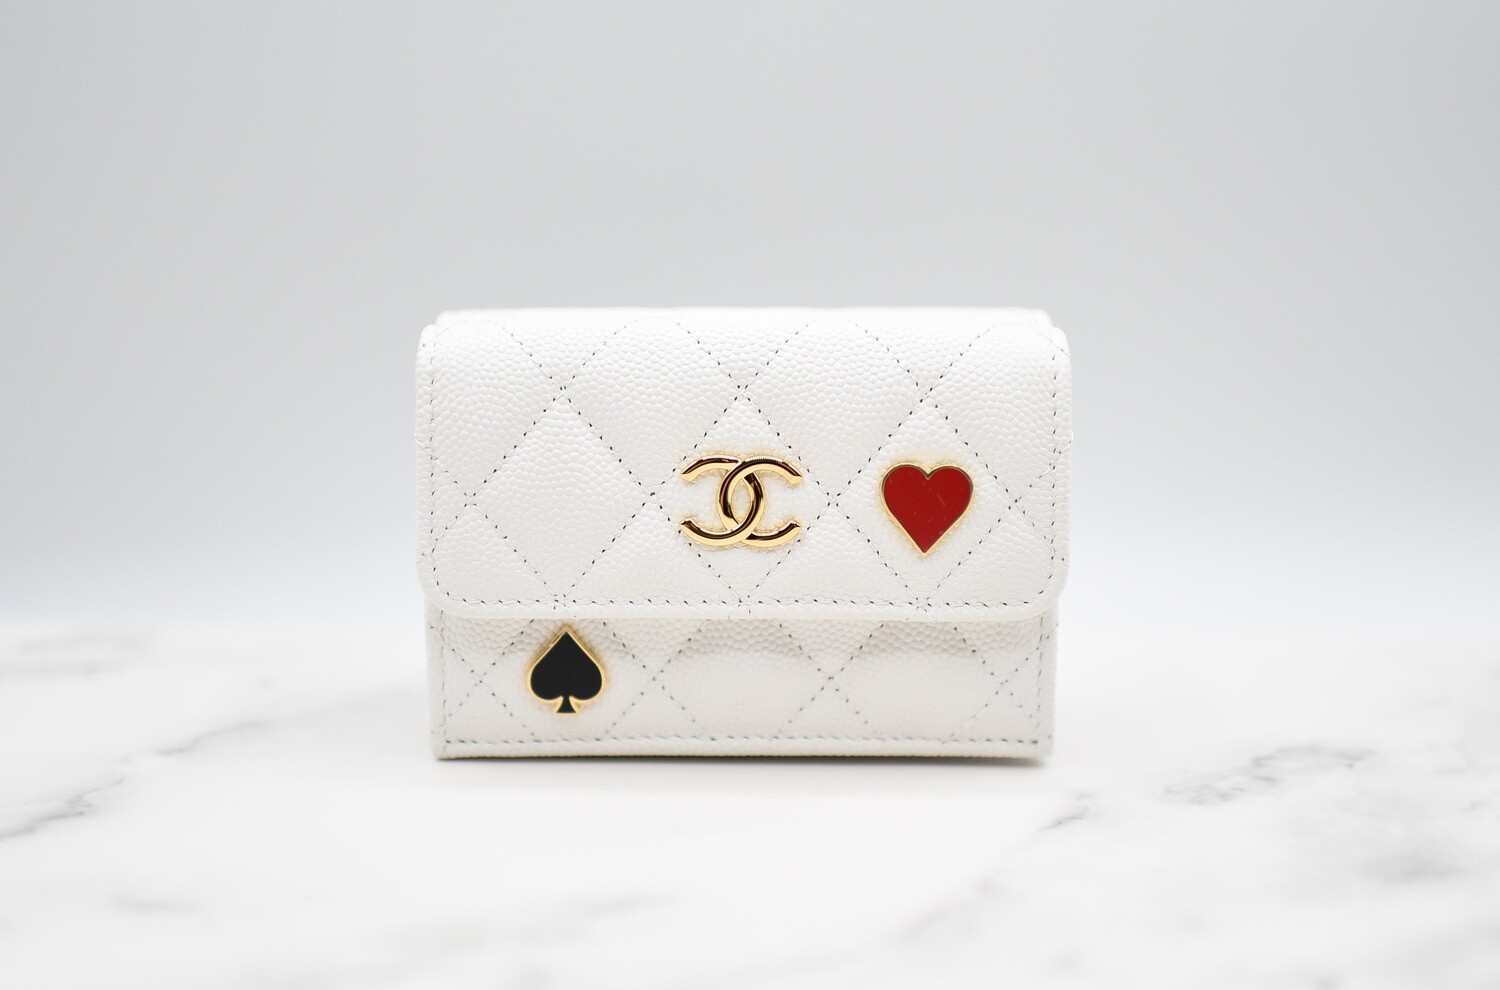 Chanel SLG Wallet, White Caviar Leather with Gold Hardware, New in Box  GA001 - Julia Rose Boston | Shop